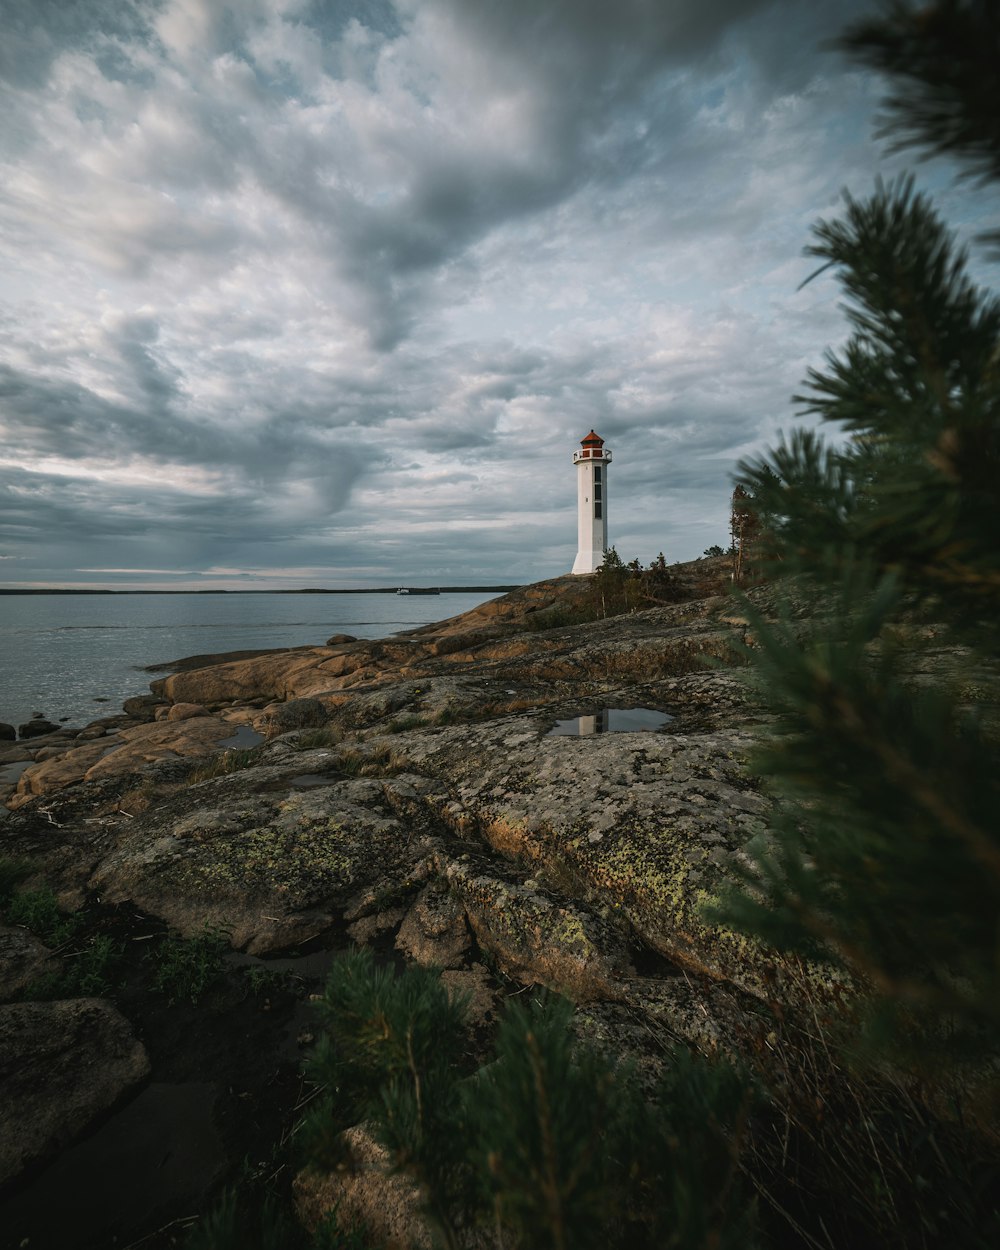 white and brown lighthouse on brown rock formation near body of water under white clouds during